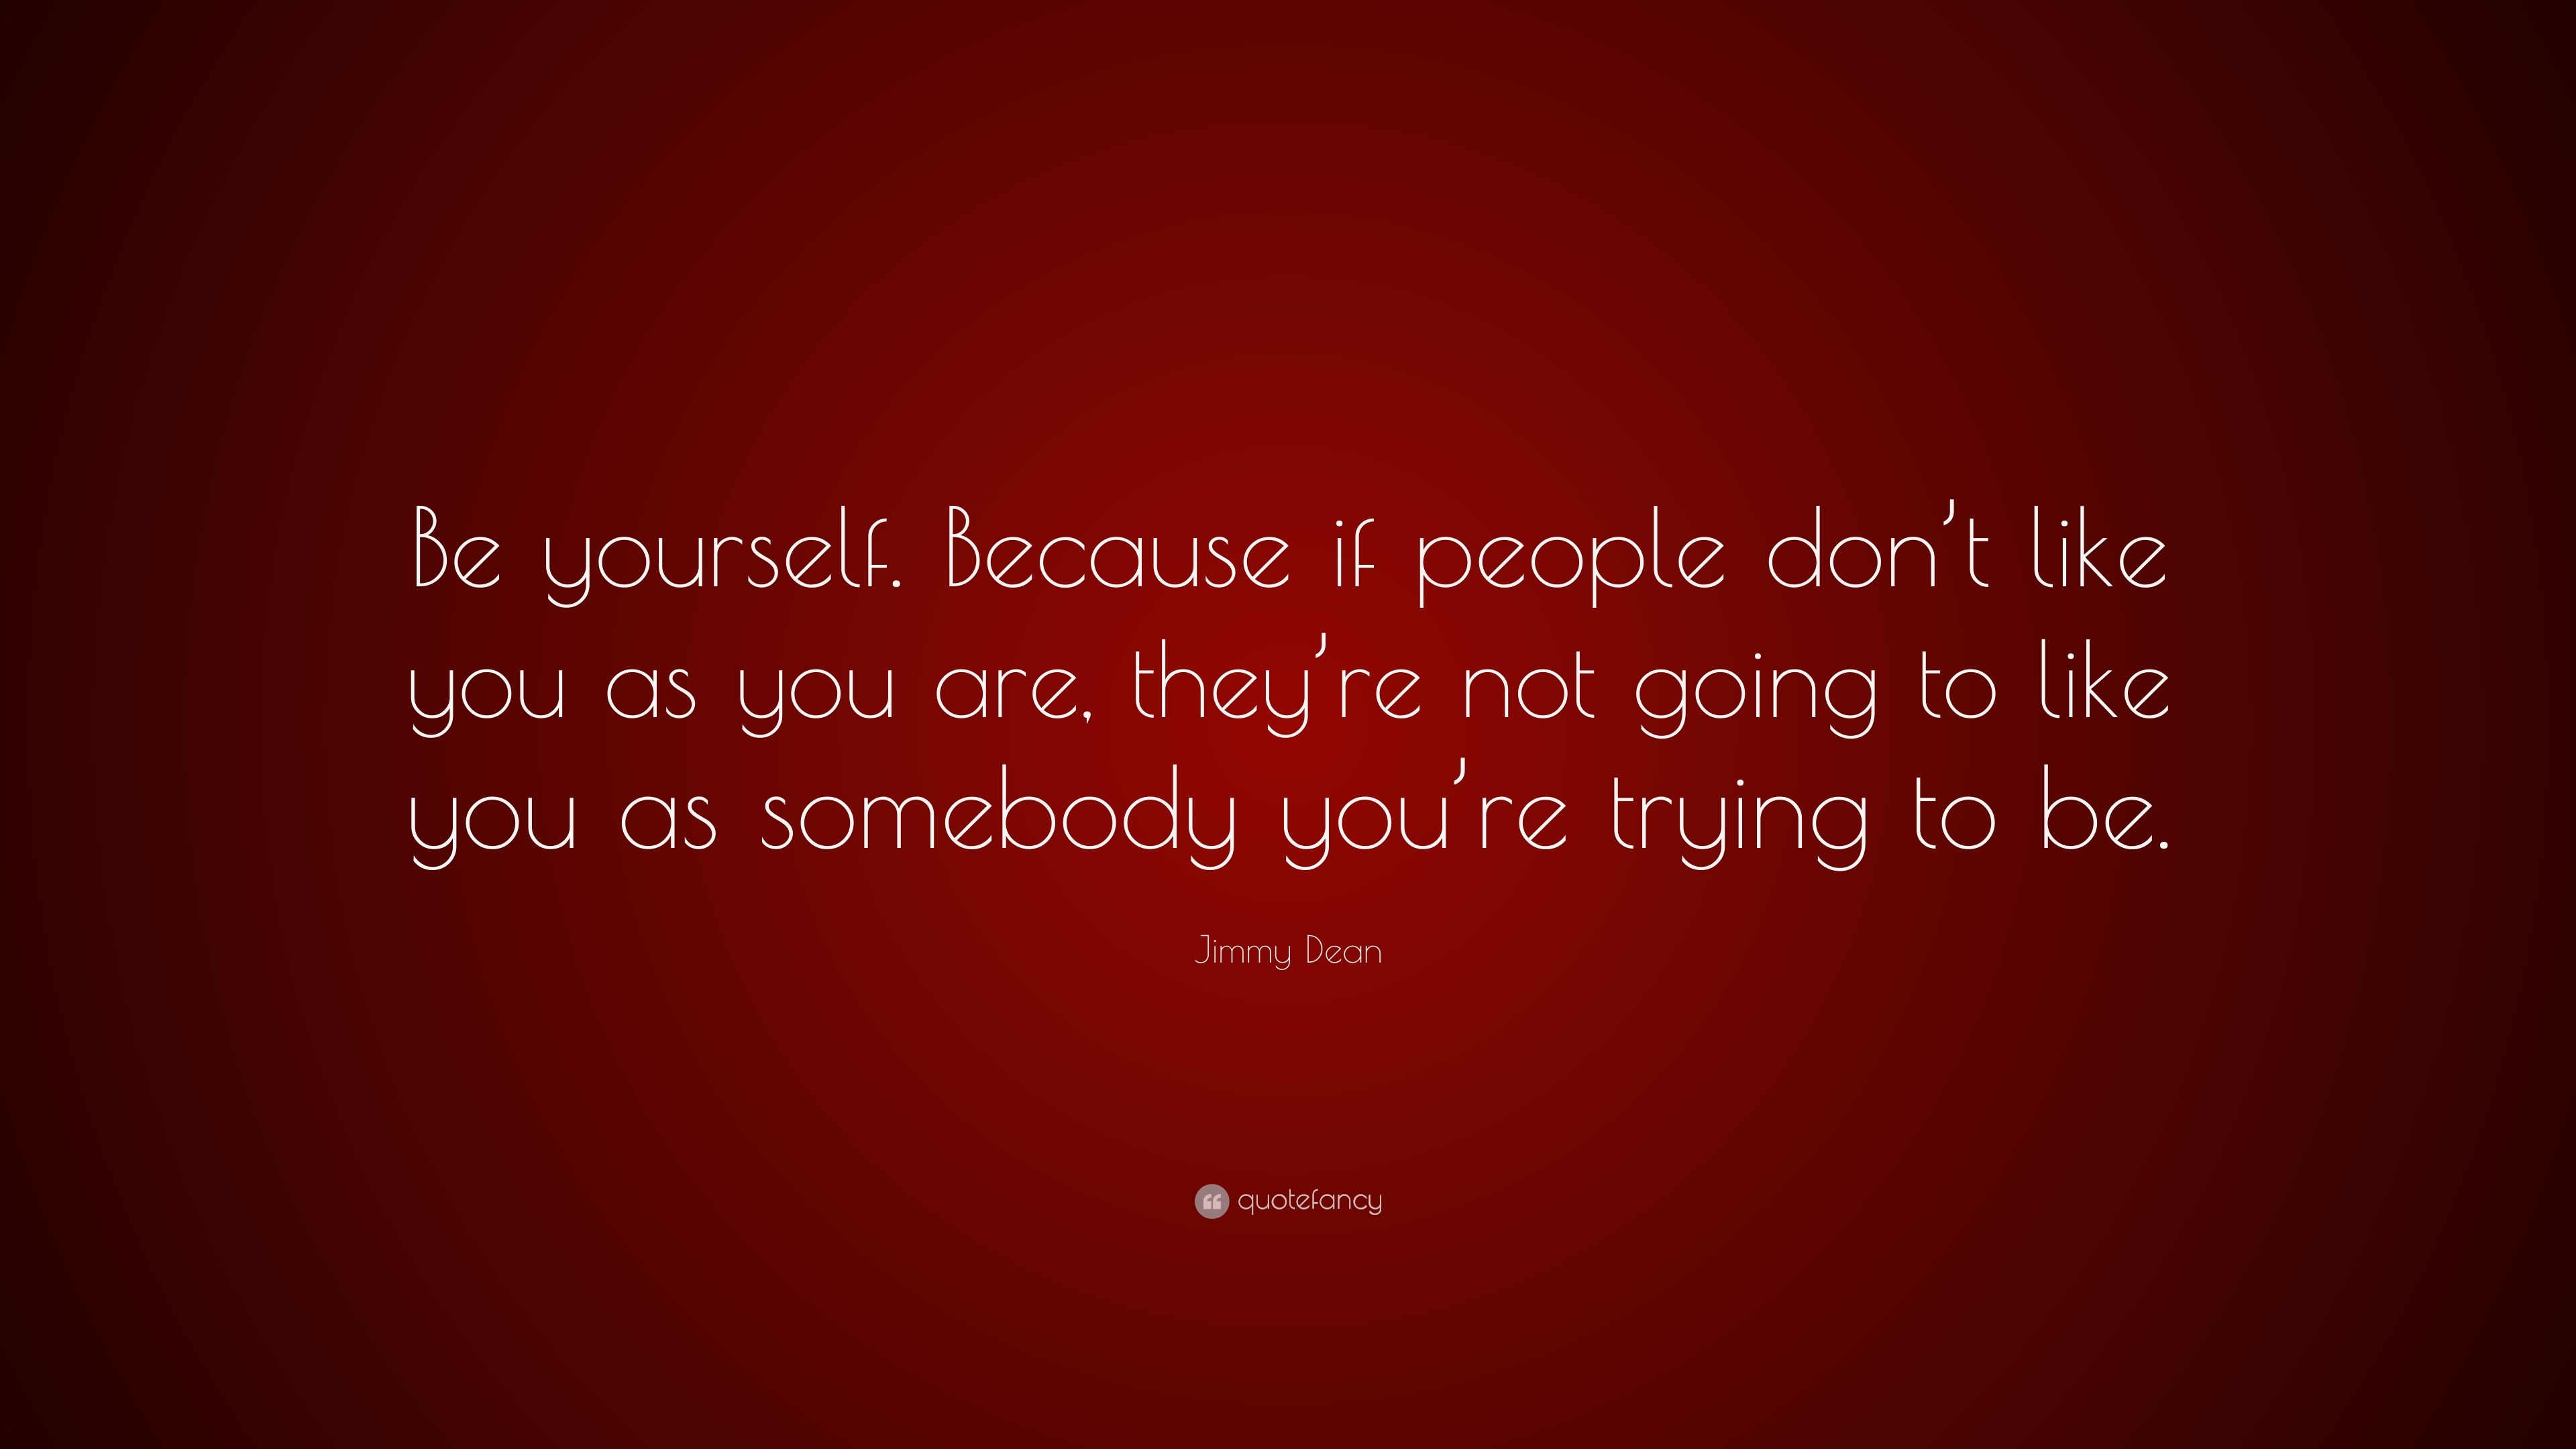 Jimmy Dean Quote Be Yourself Because If People Don T Like You As You Are They Re Not Going To Like You As Somebody You Re Trying To Be 7 Wallpapers Quotefancy